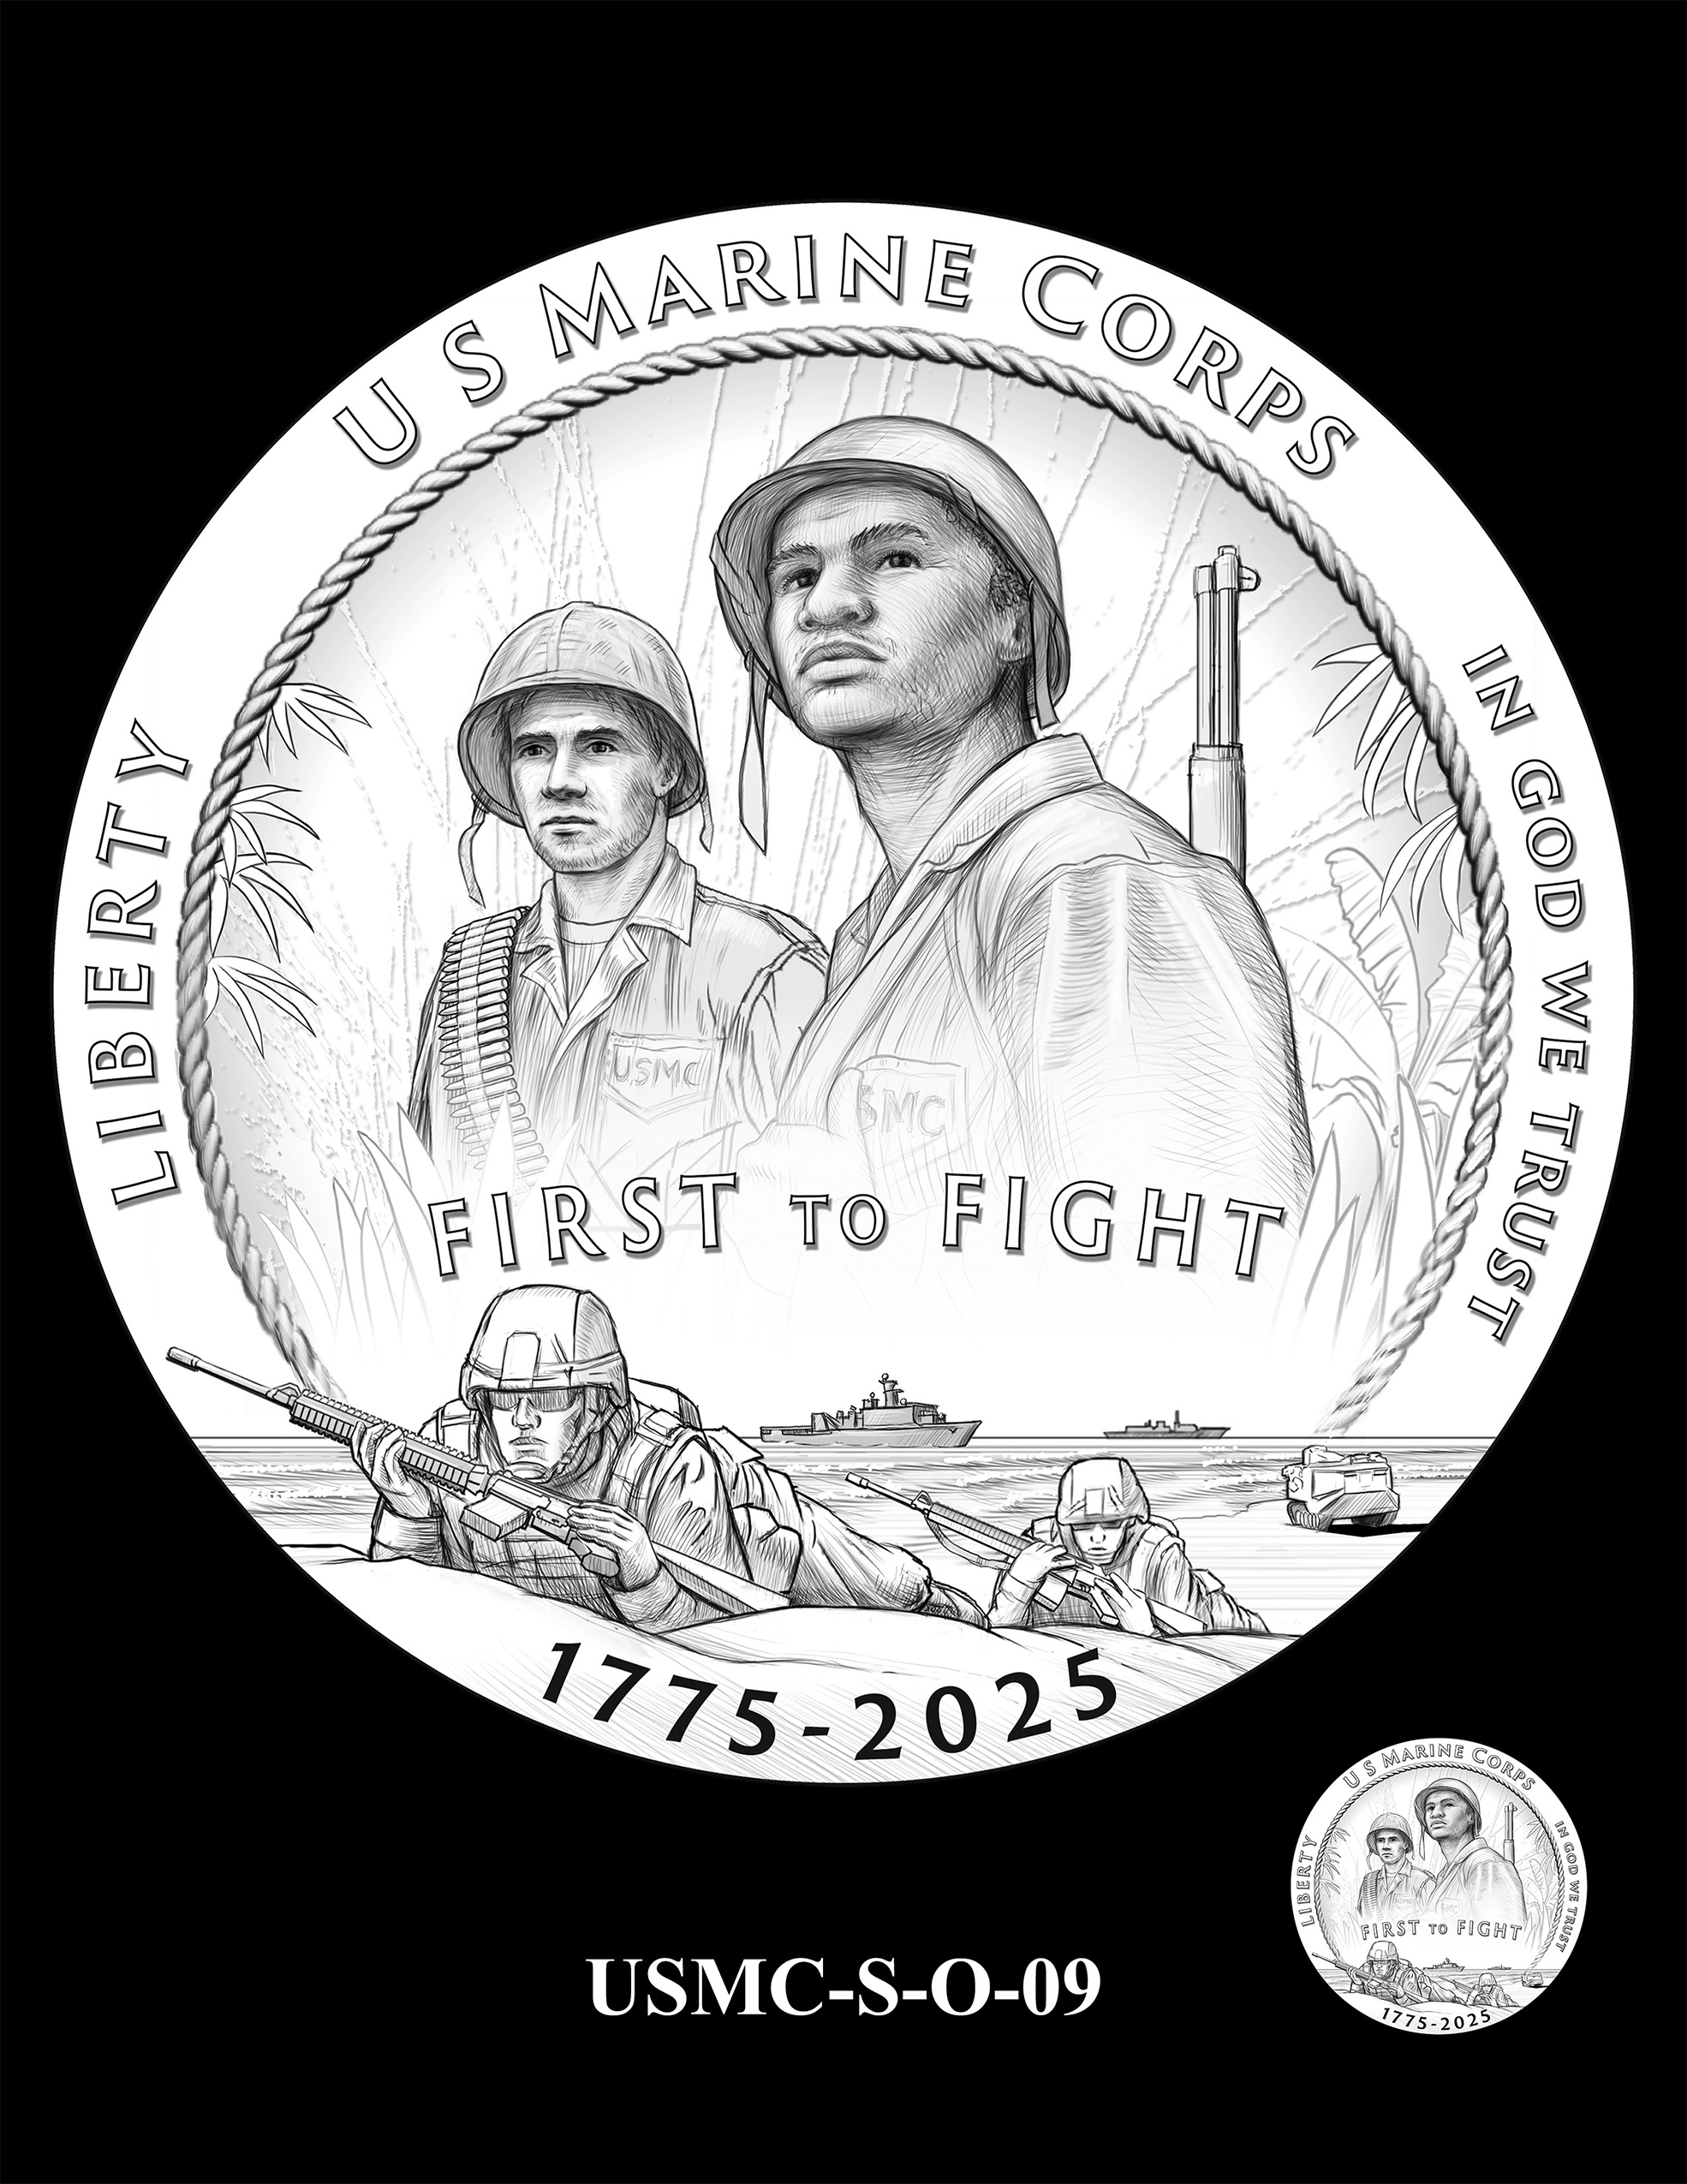 USMC-S-O-09 -- 250th Anniversary of the United States Marine Corps - Silver